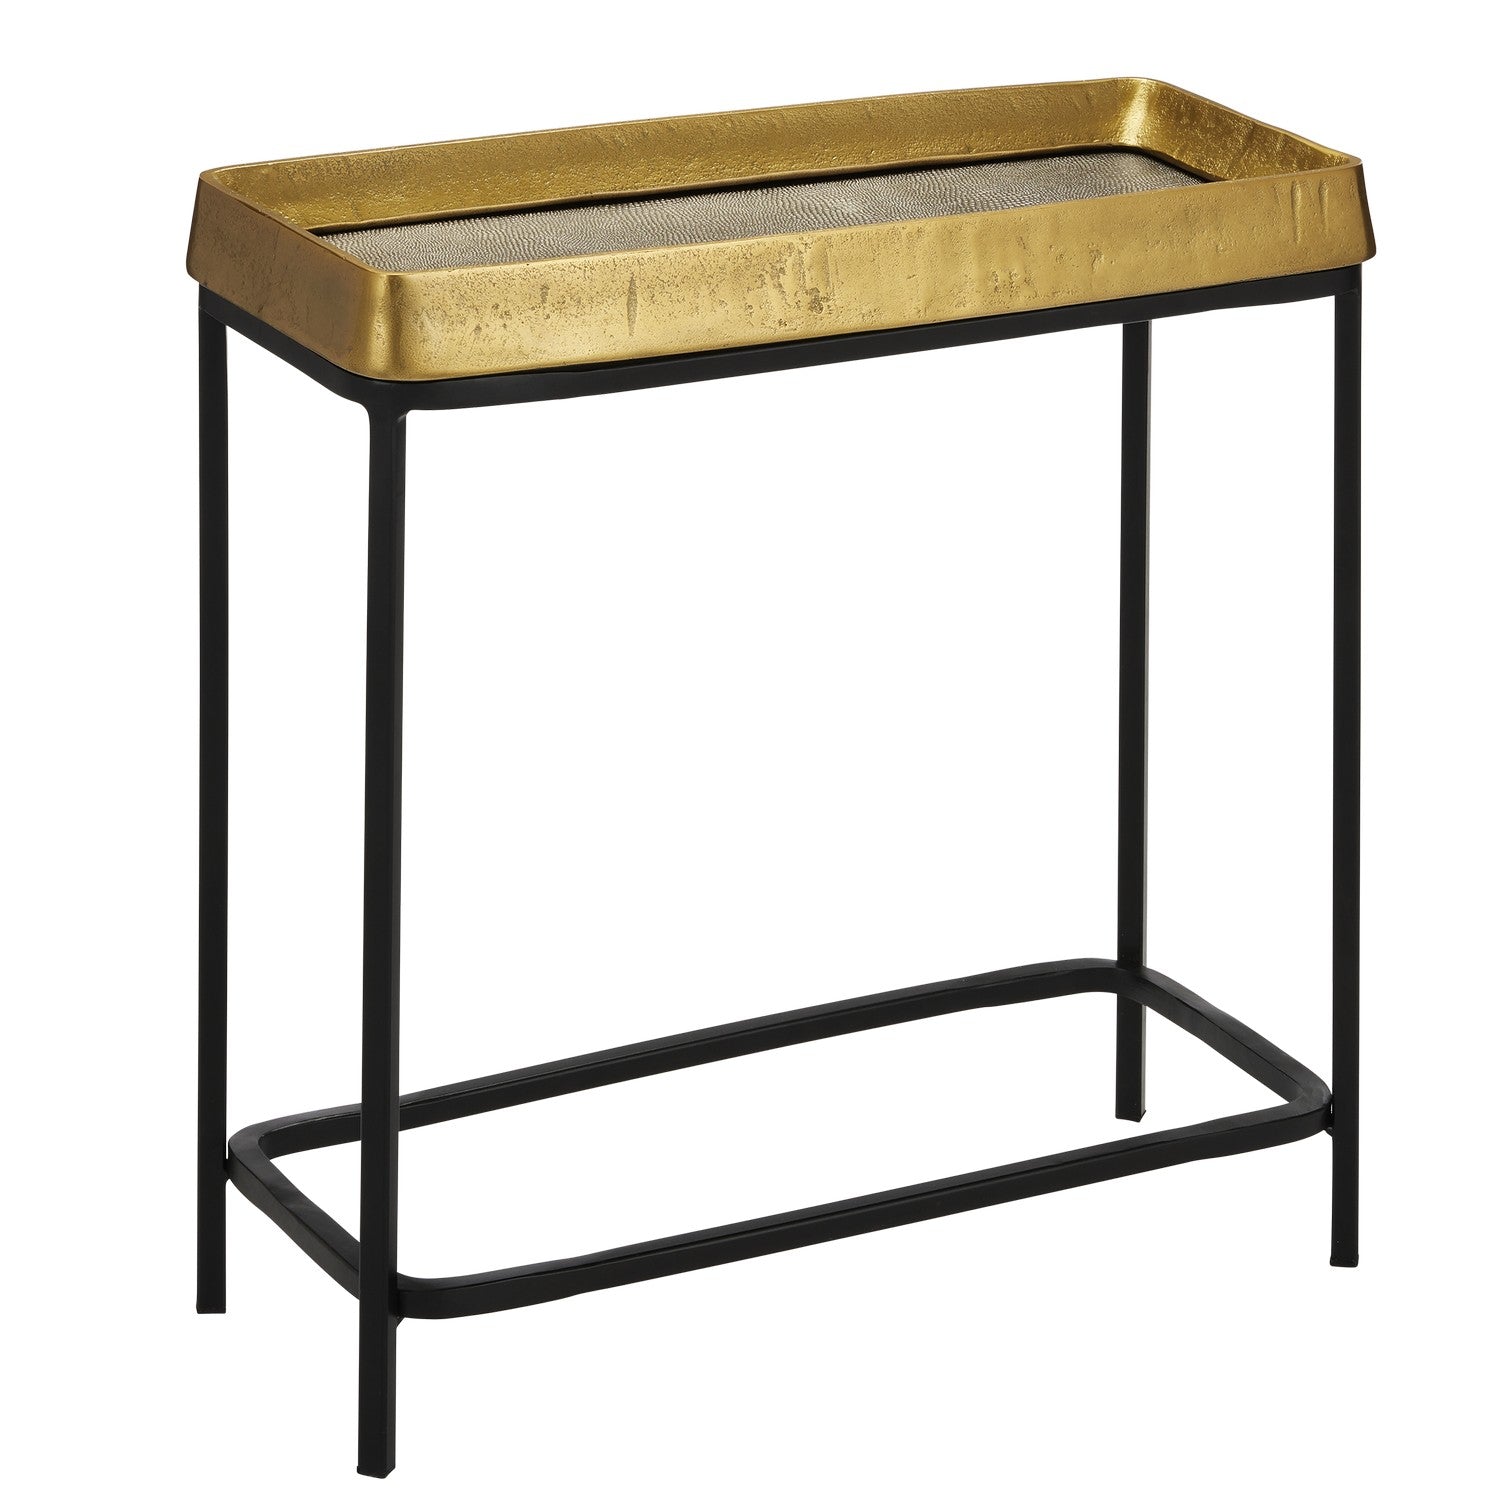 Currey and Company - Side Table - Tanay - Antique Brass/Graphite/Black- Union Lighting Luminaires Decor